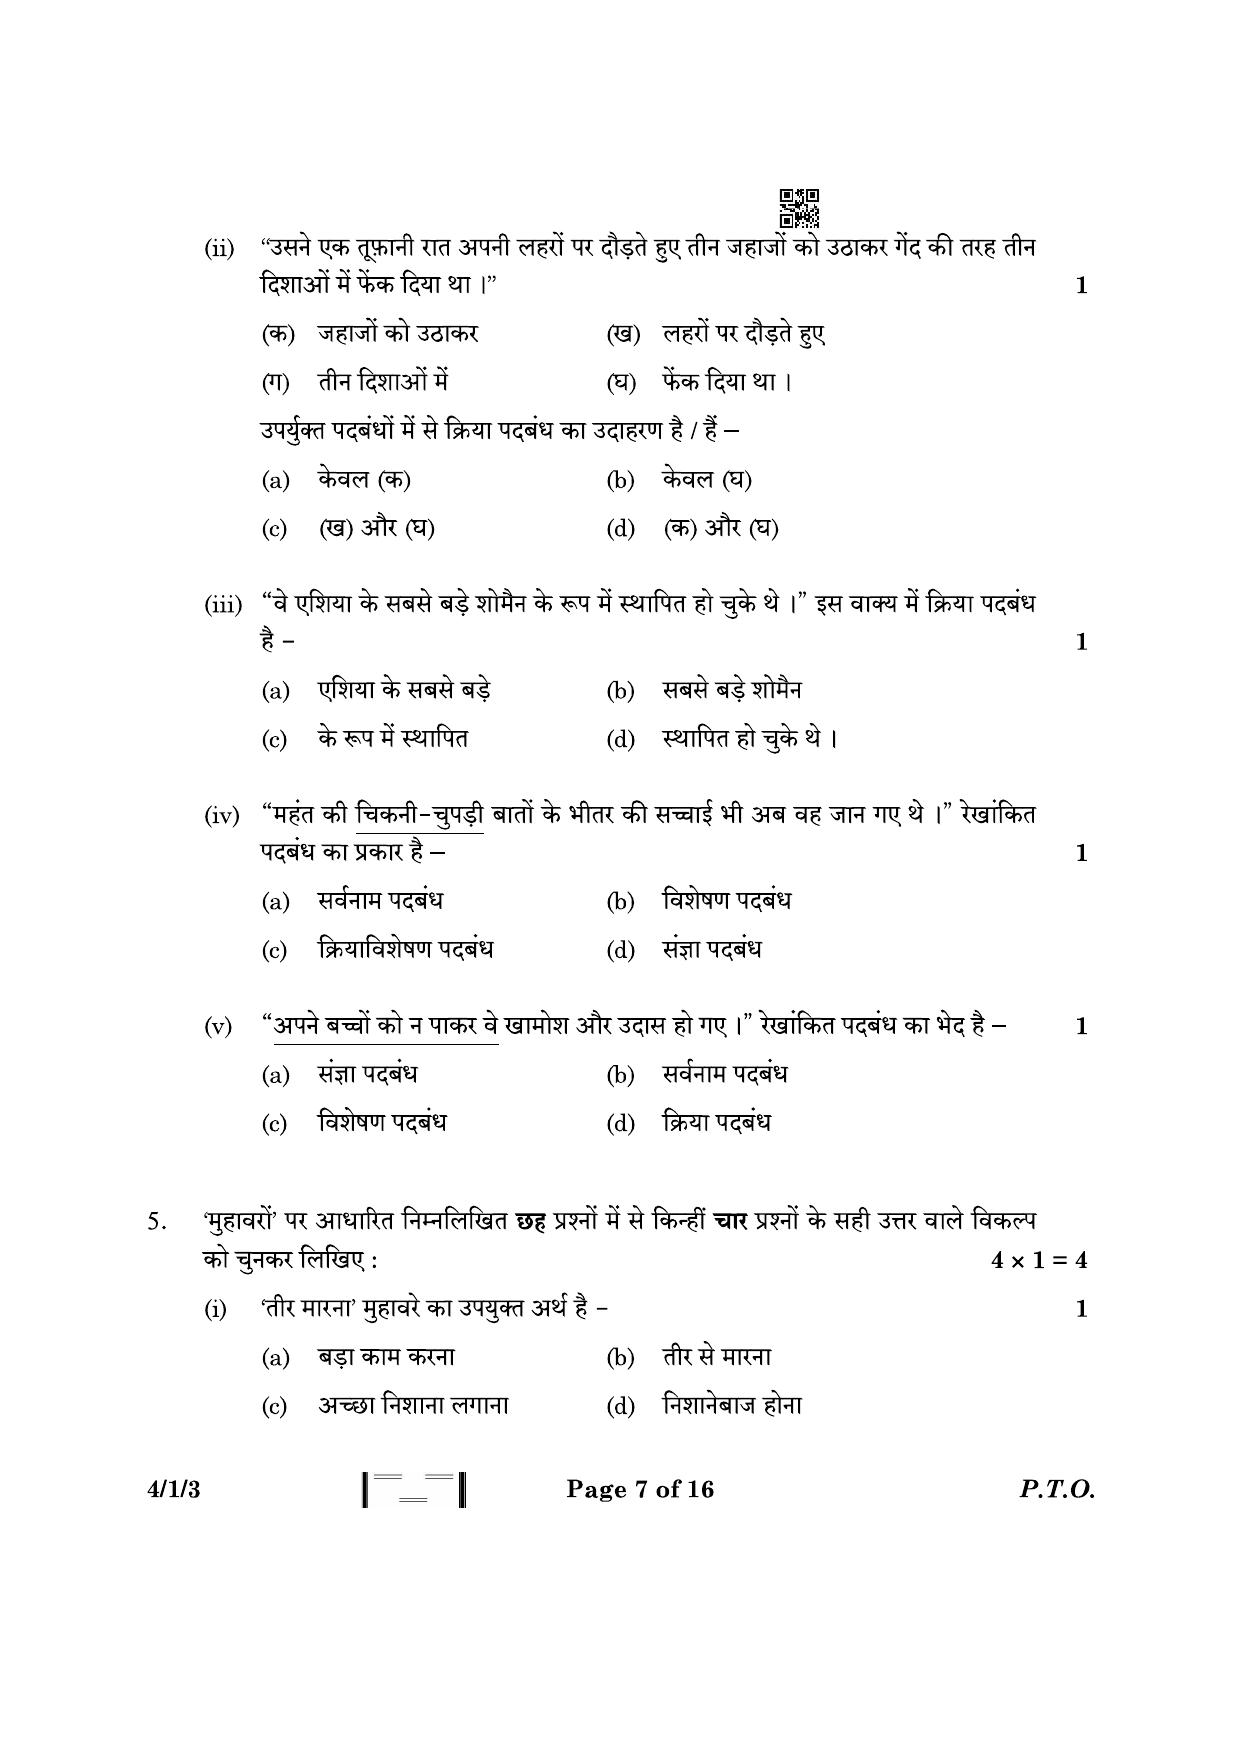 CBSE Class 10 4-1-3 Hindi B 2023 Question Paper - Page 7